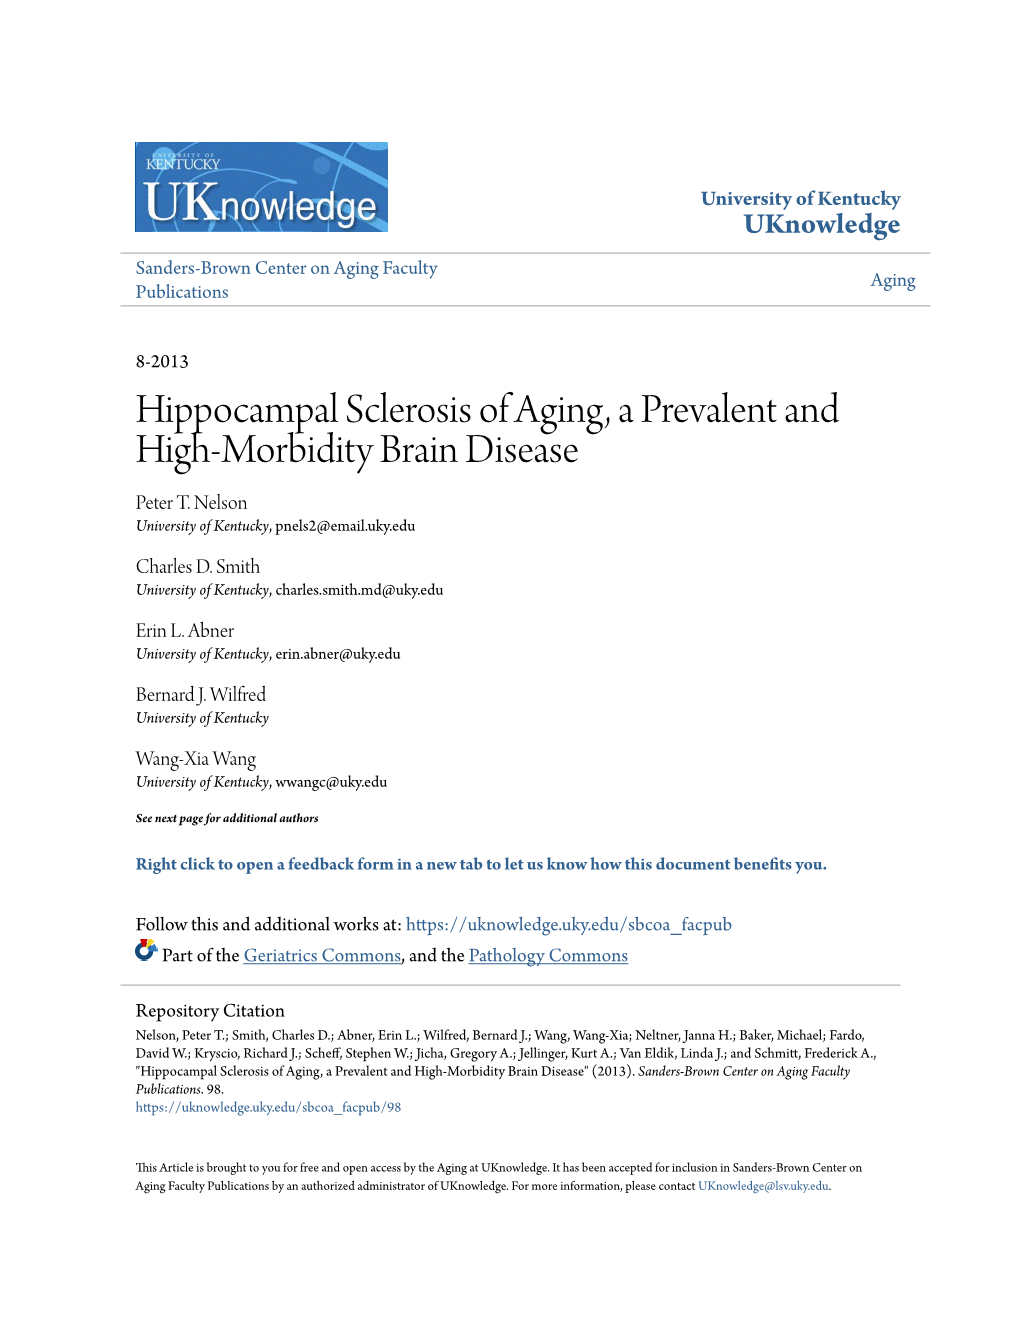 Hippocampal Sclerosis of Aging, a Prevalent and High-Morbidity Brain Disease Peter T